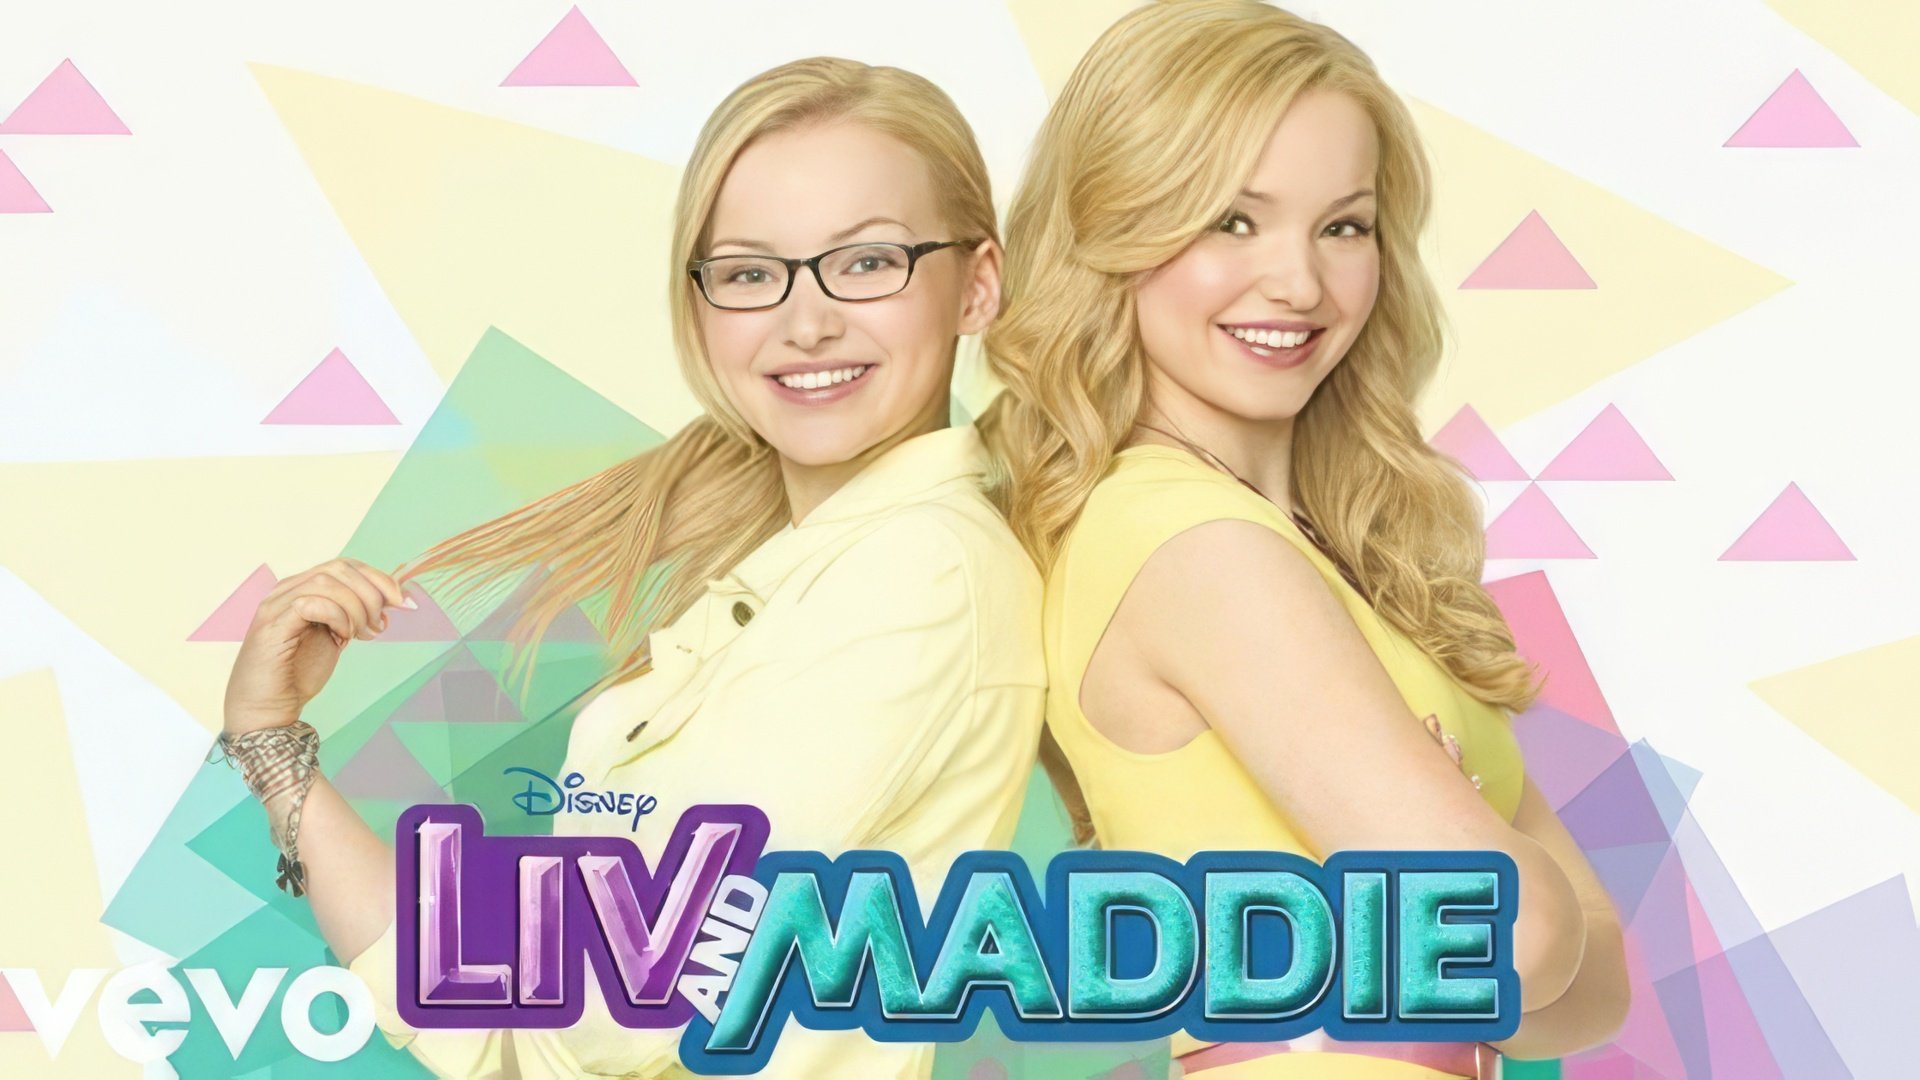 Dove Cameron portrayed twin sisters in 'Liv and Maddie'